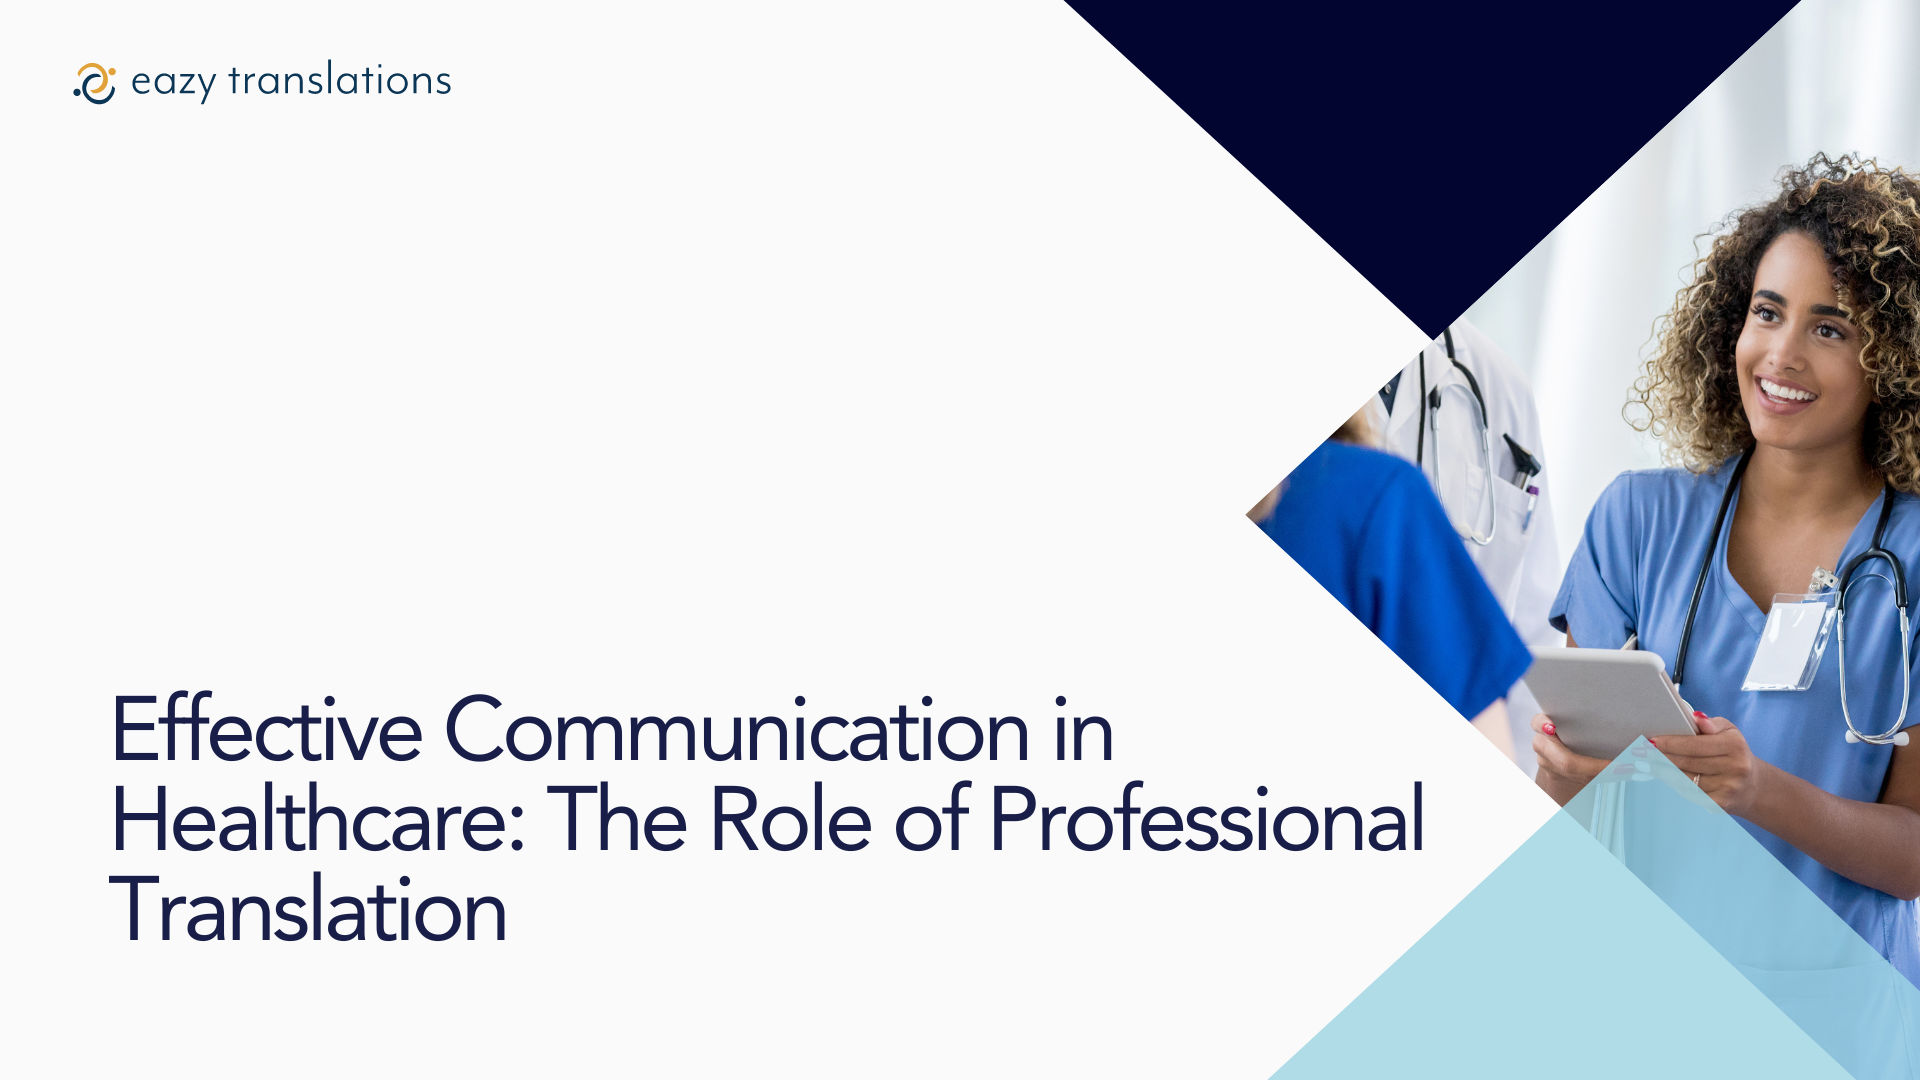 Effective Communication in Healthcare: The Role of Professional Translation